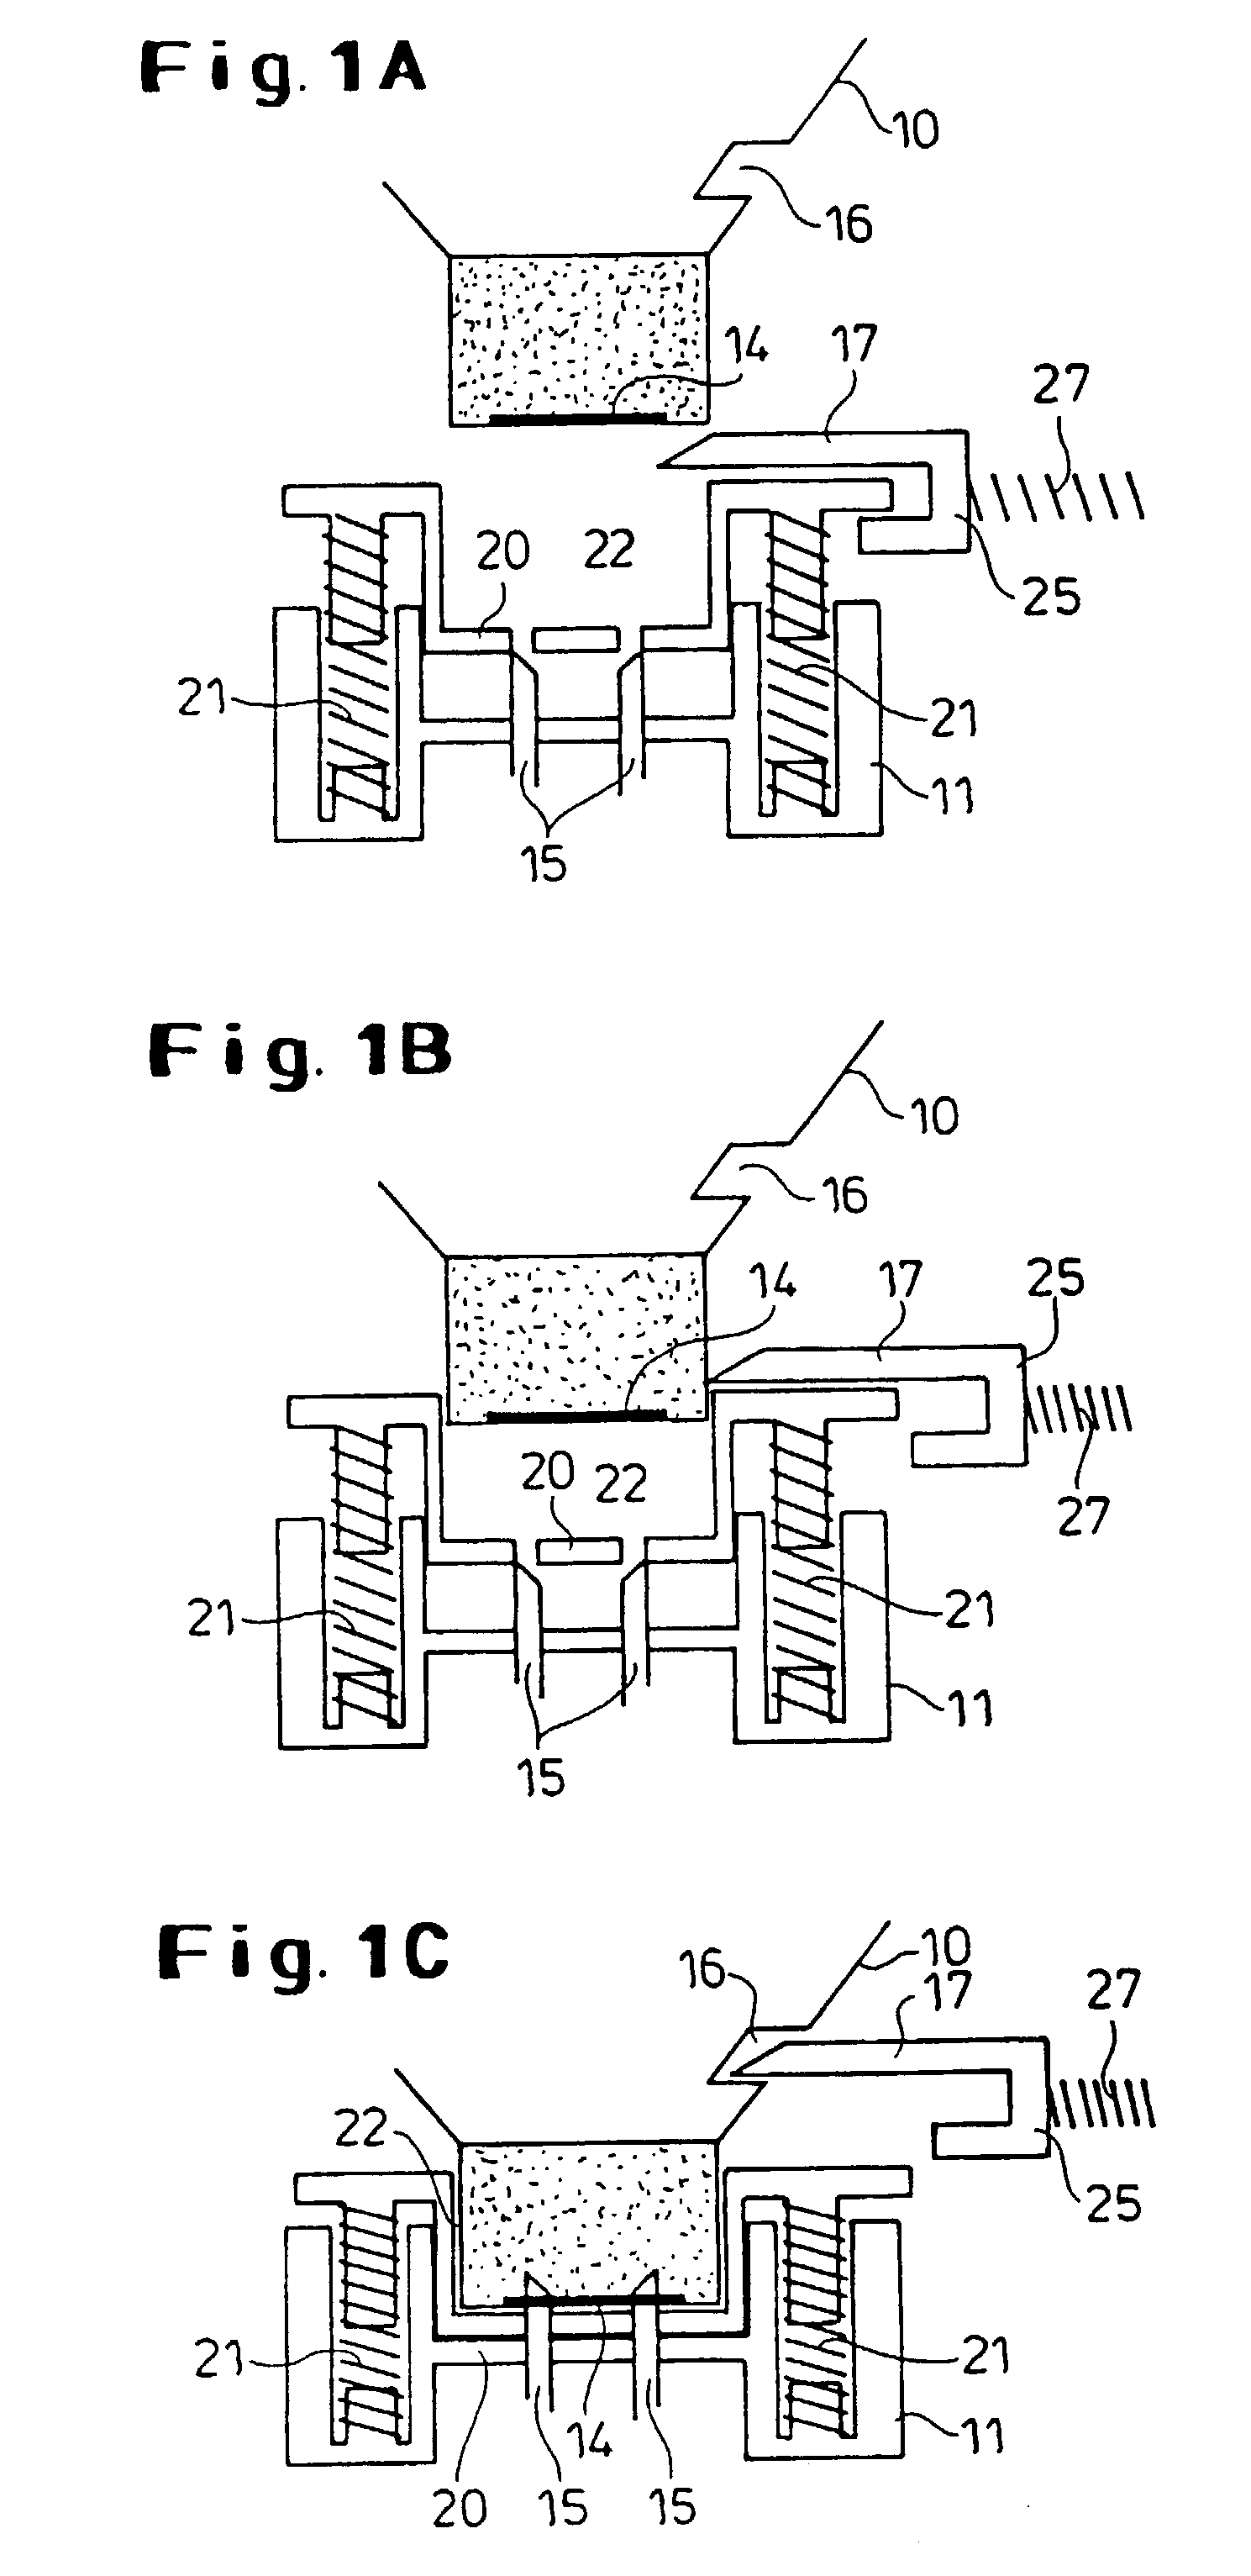 Reclosable fitment for connecting a reservoir to a dispensing appliance